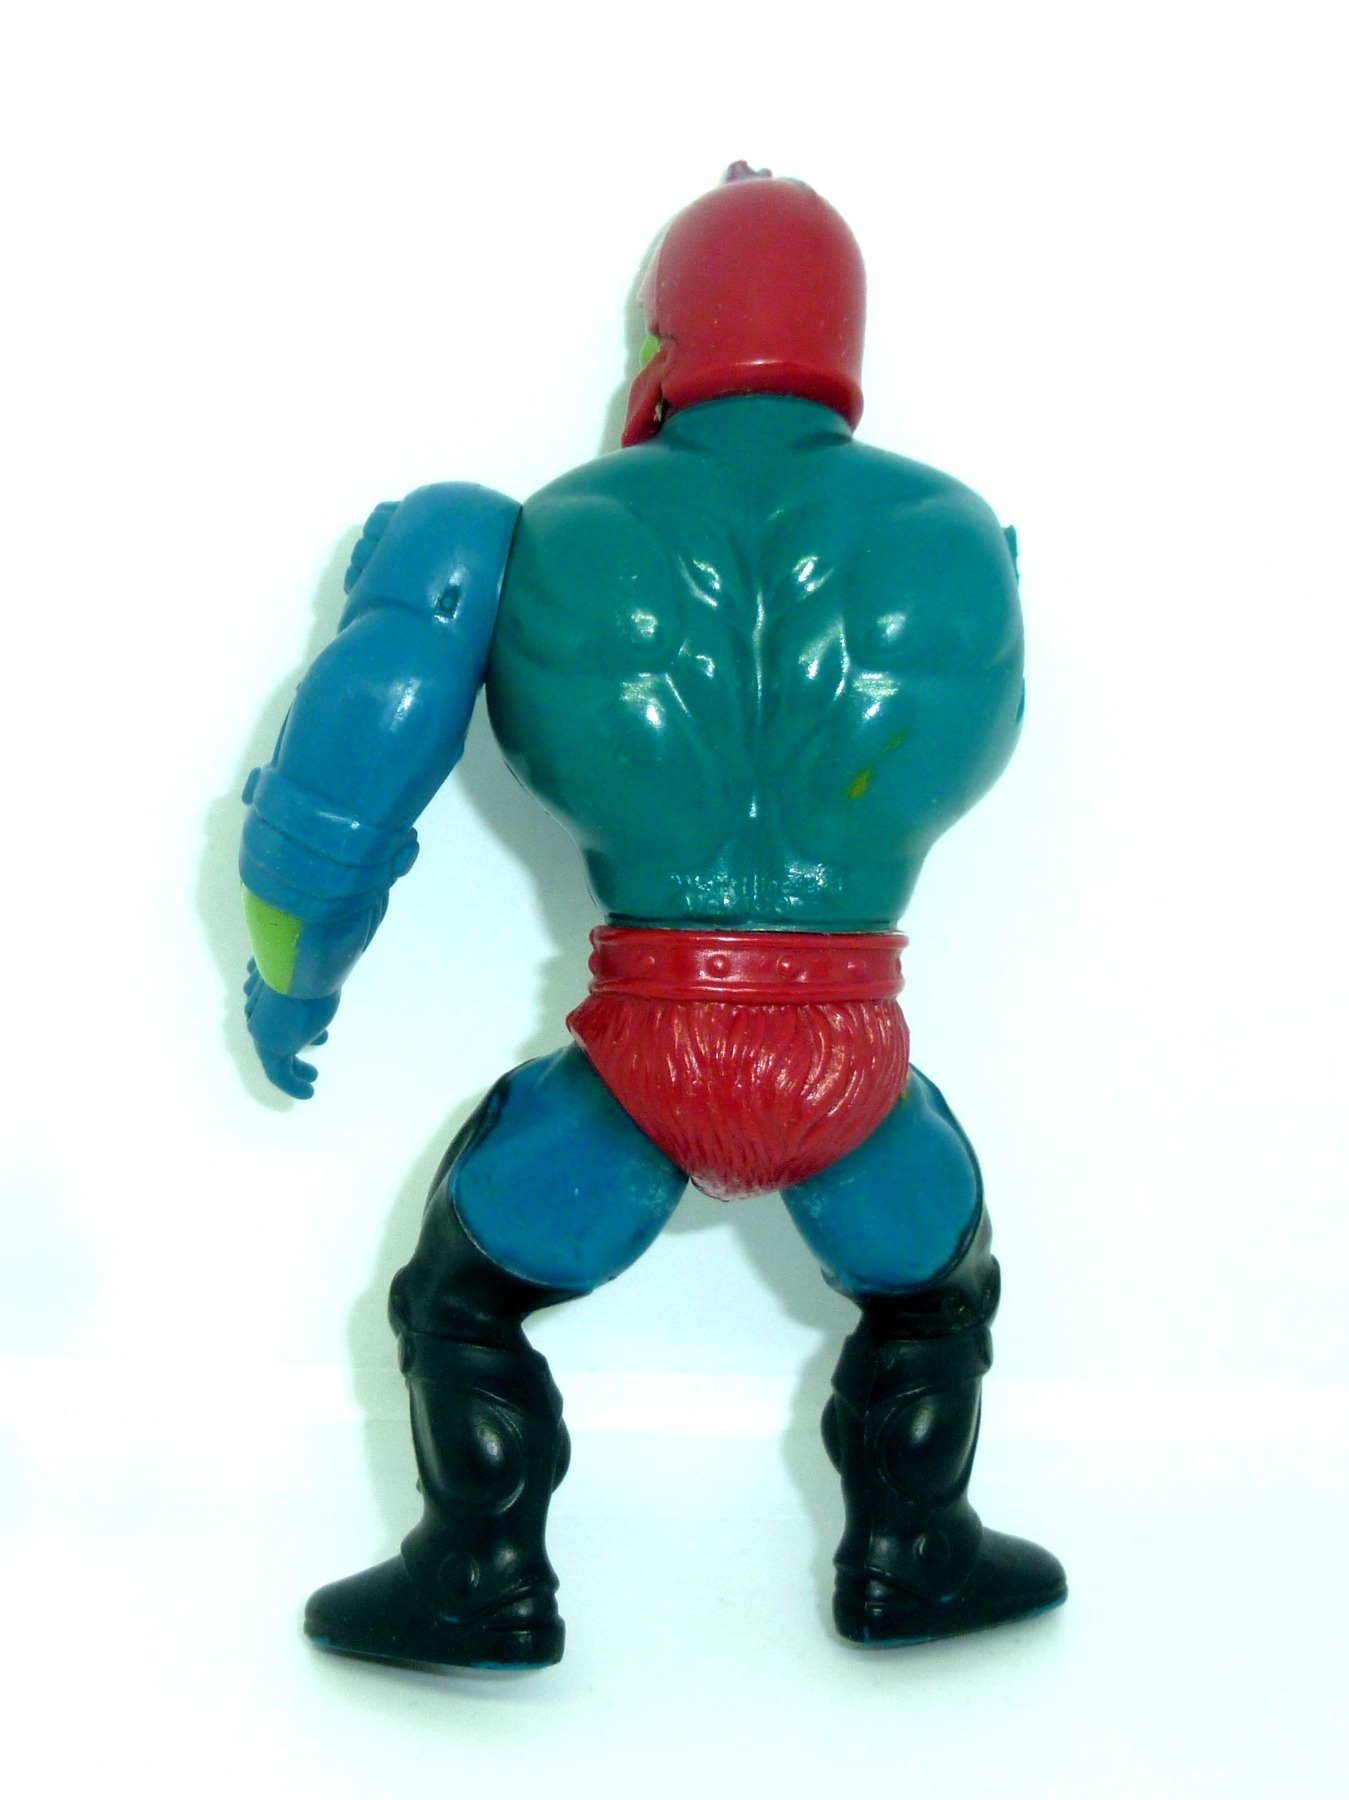 Trap Jaw defect 4